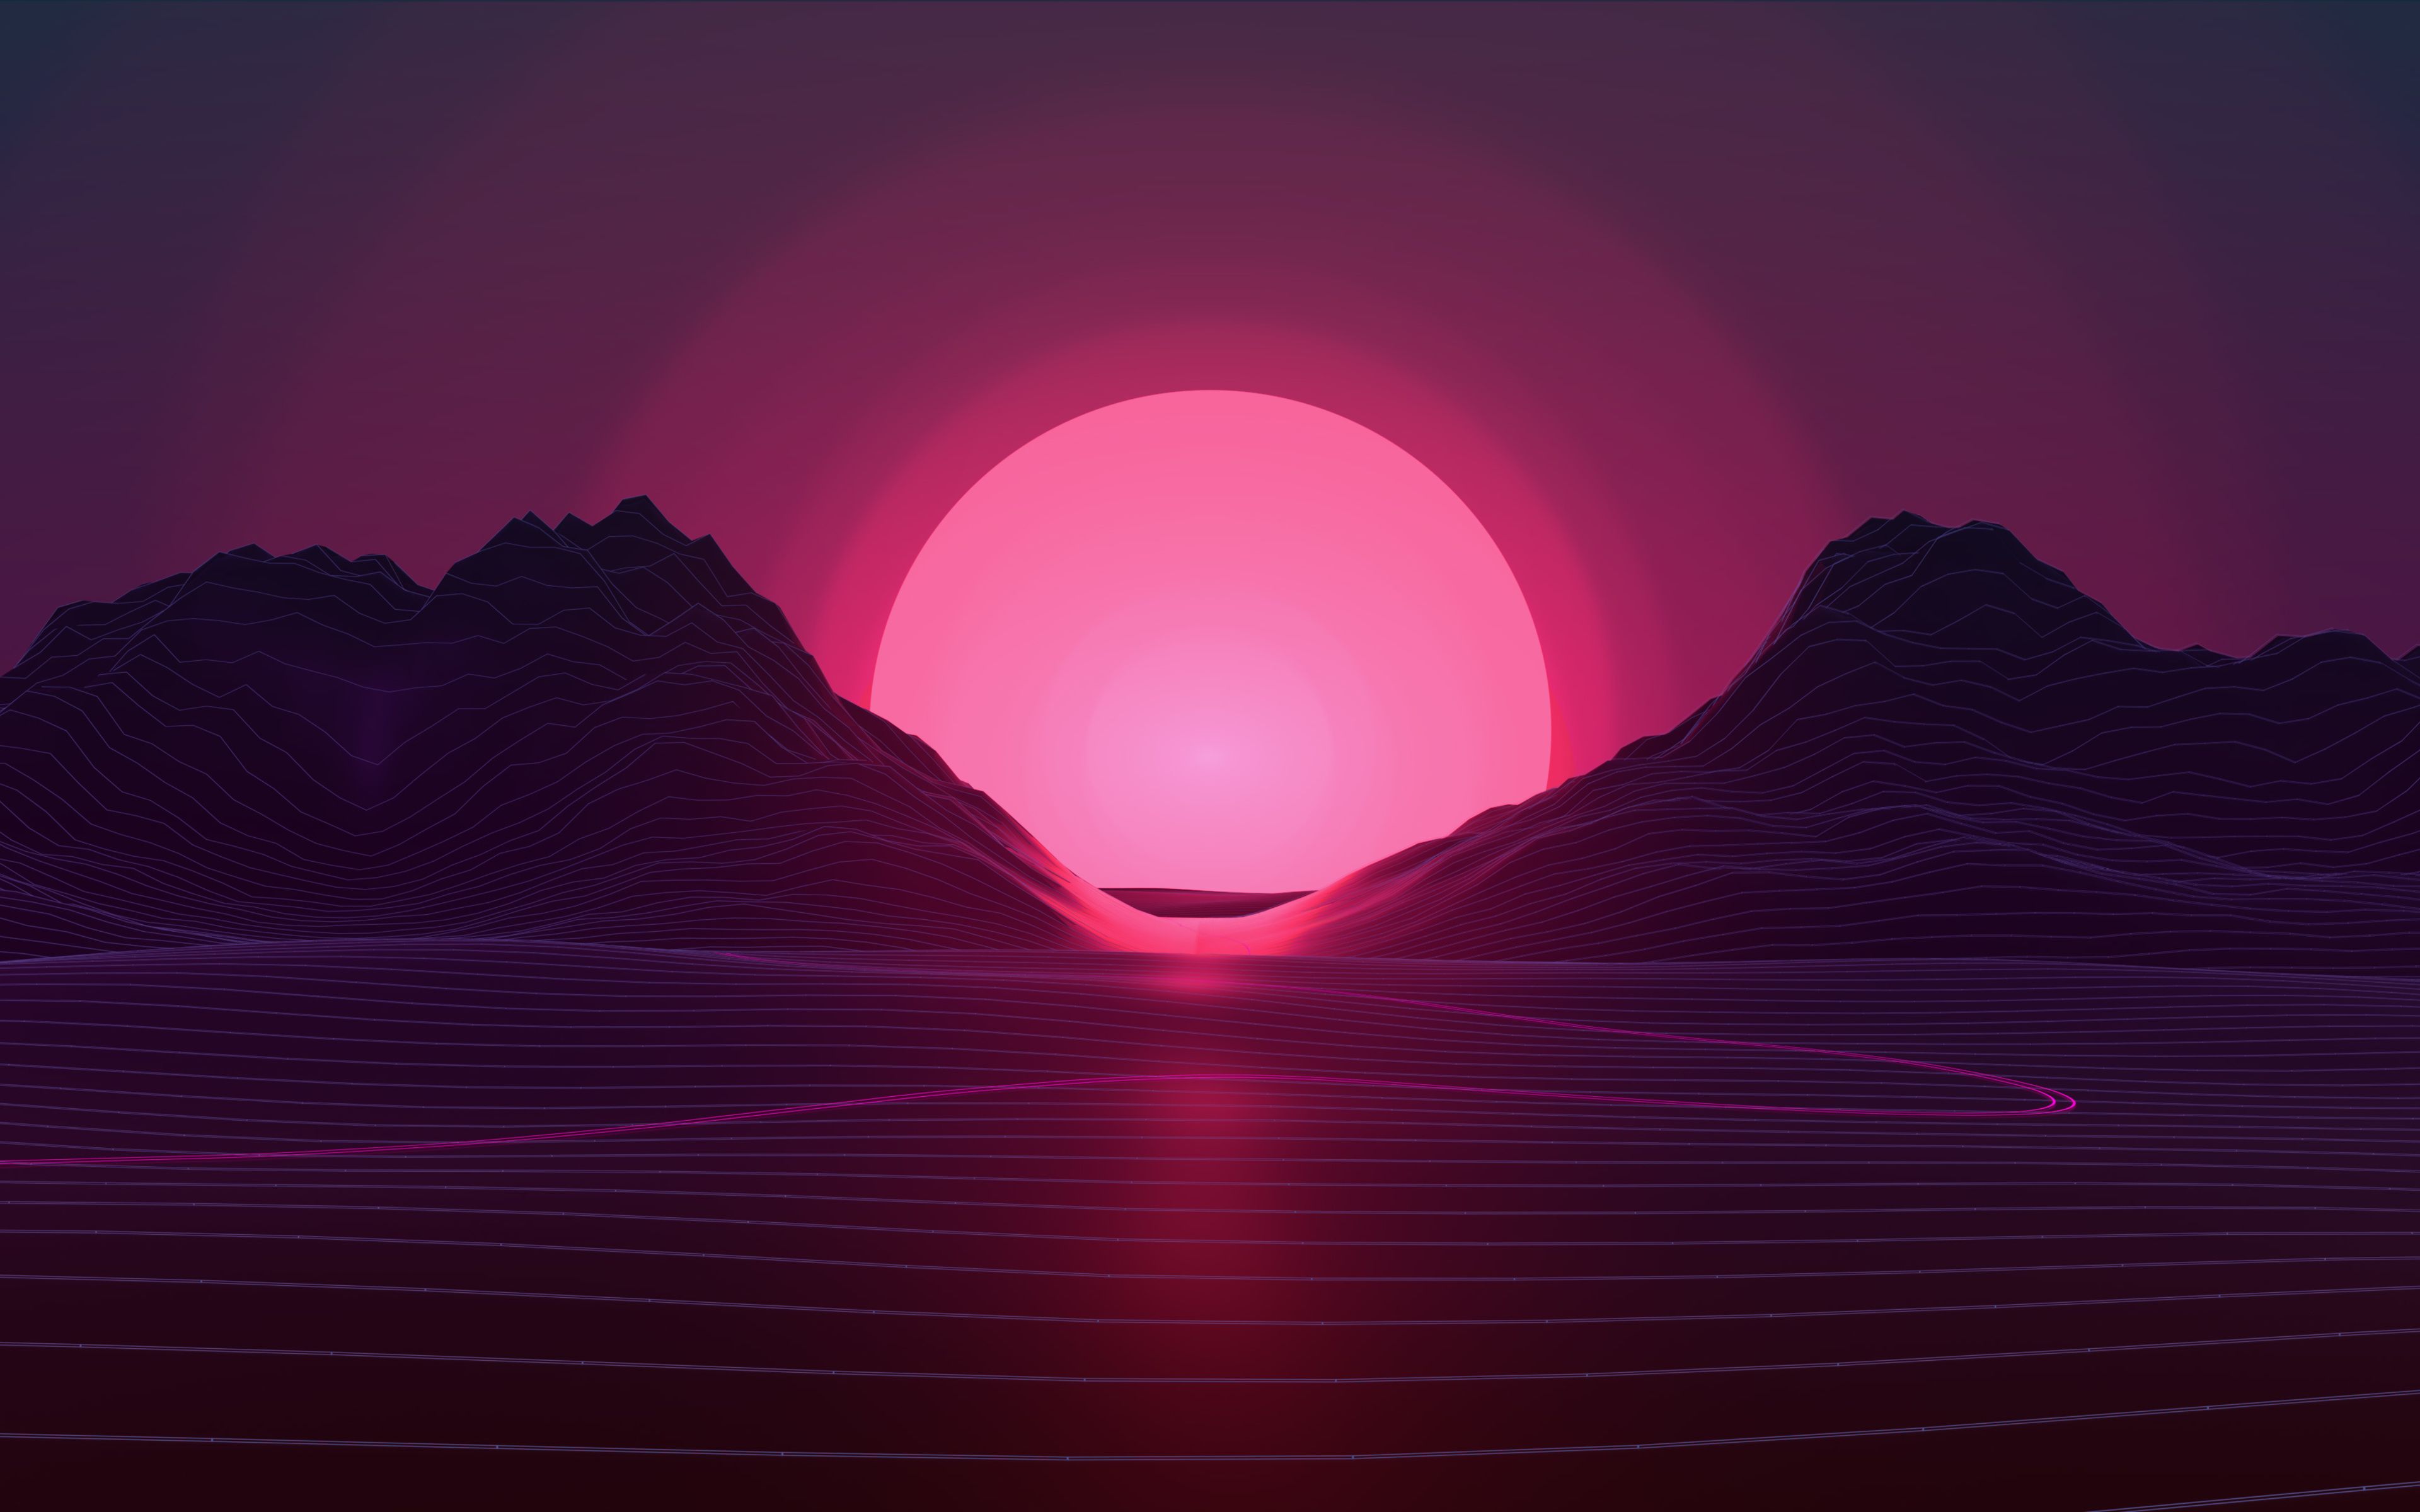 A sunset over the mountains with pink and purple colors - Landscape, neon pink, sun